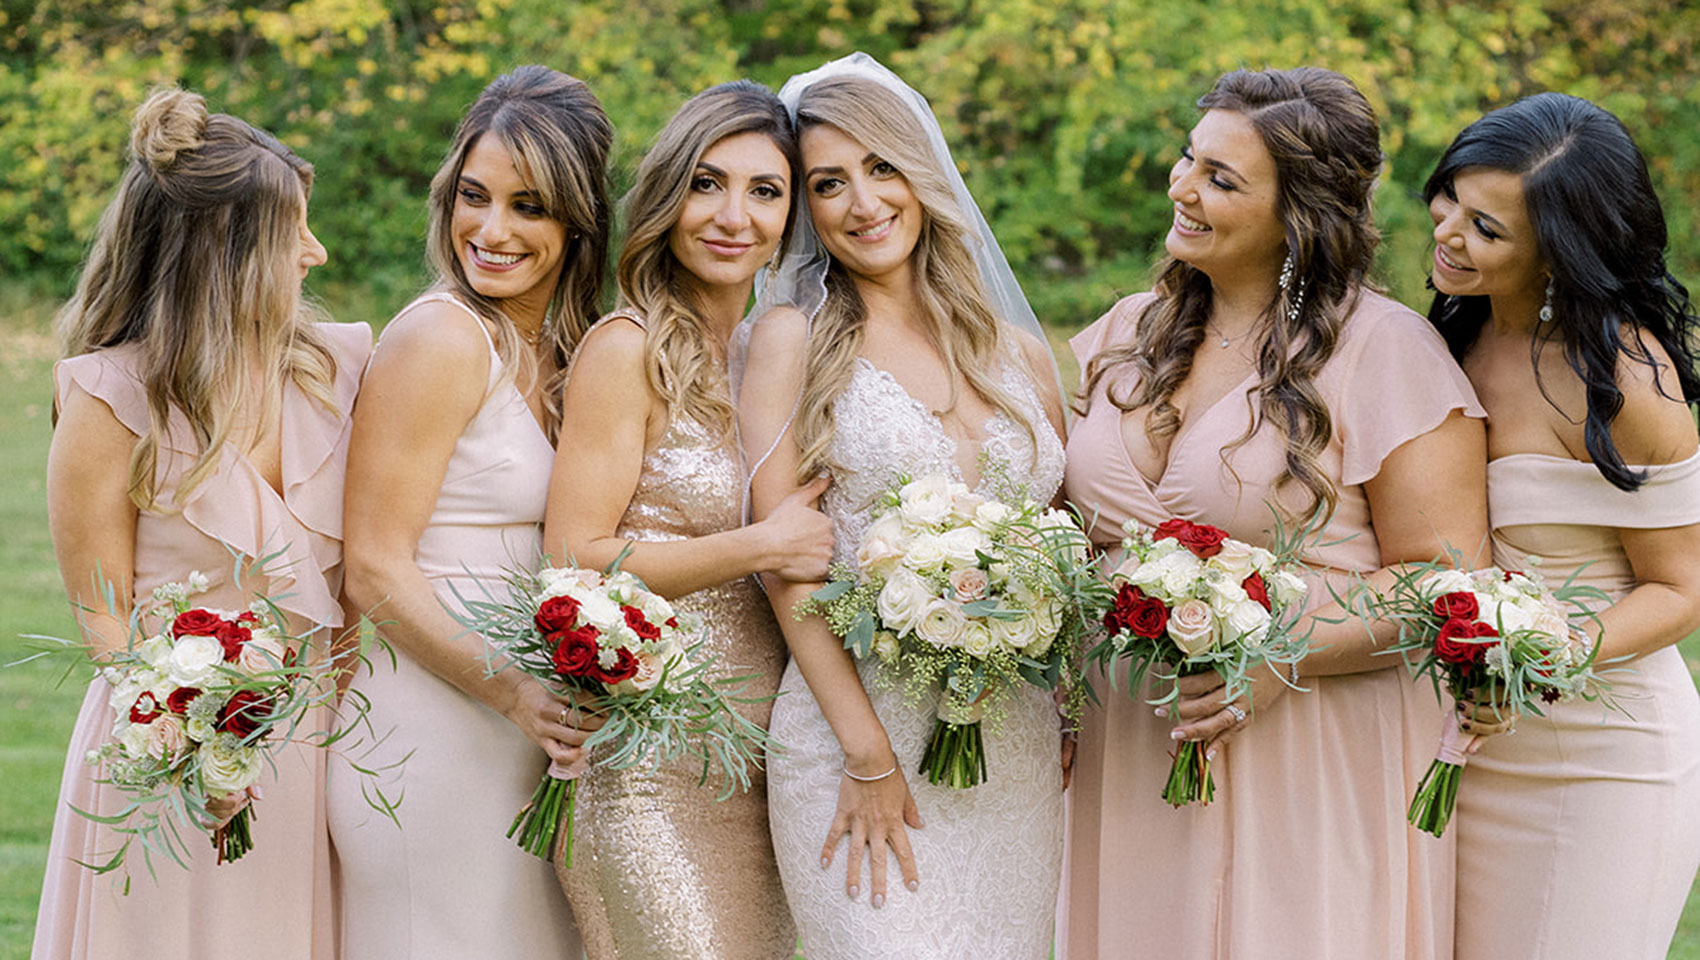 Bridal party posing with flowers